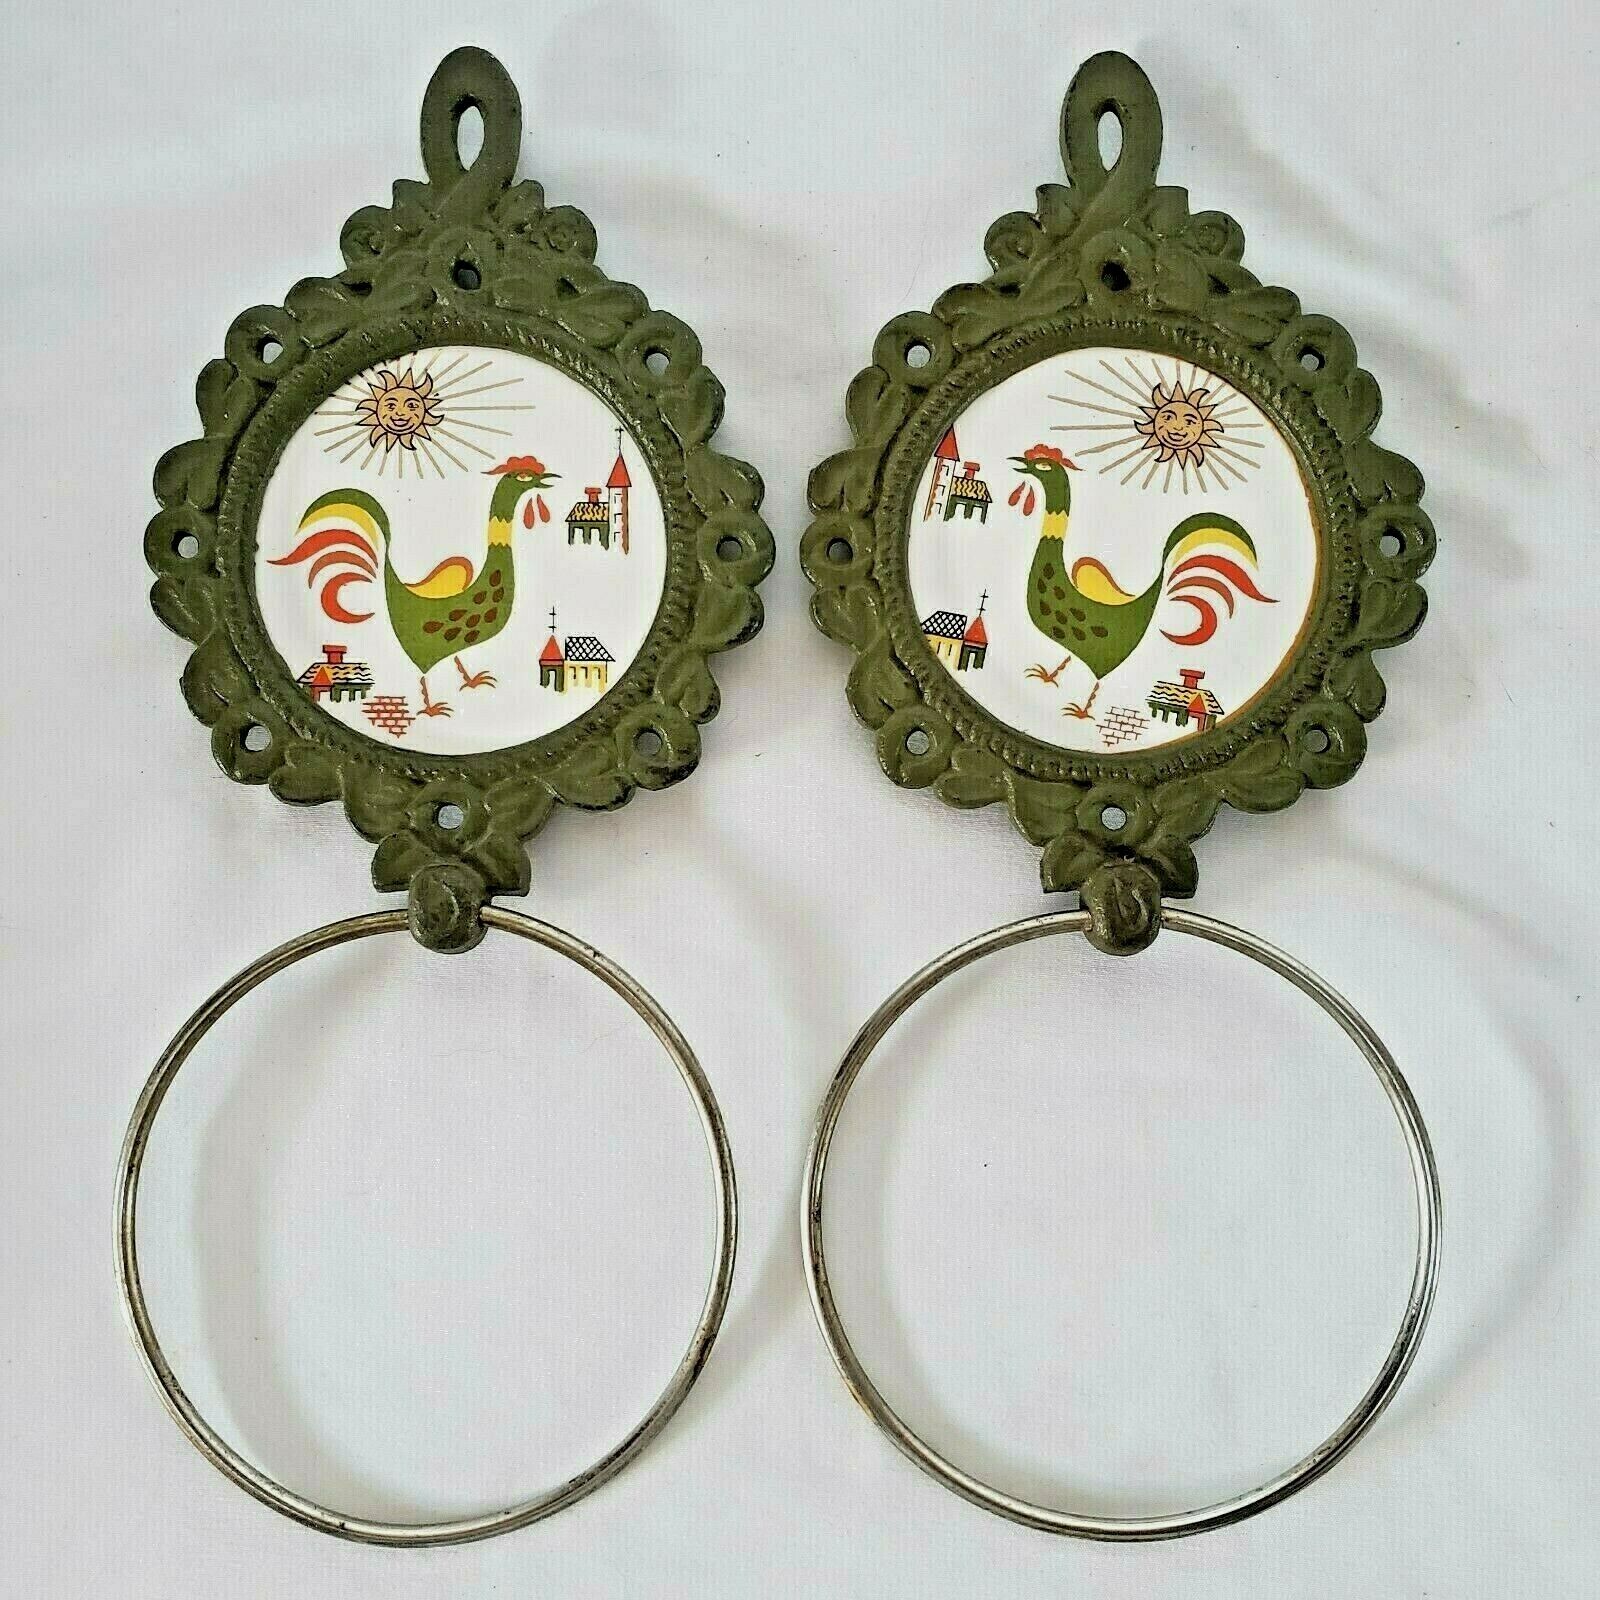 Two (2) Enesco Rooster & Sun Cast Iron Framed Round Tiles with Towel Rings 